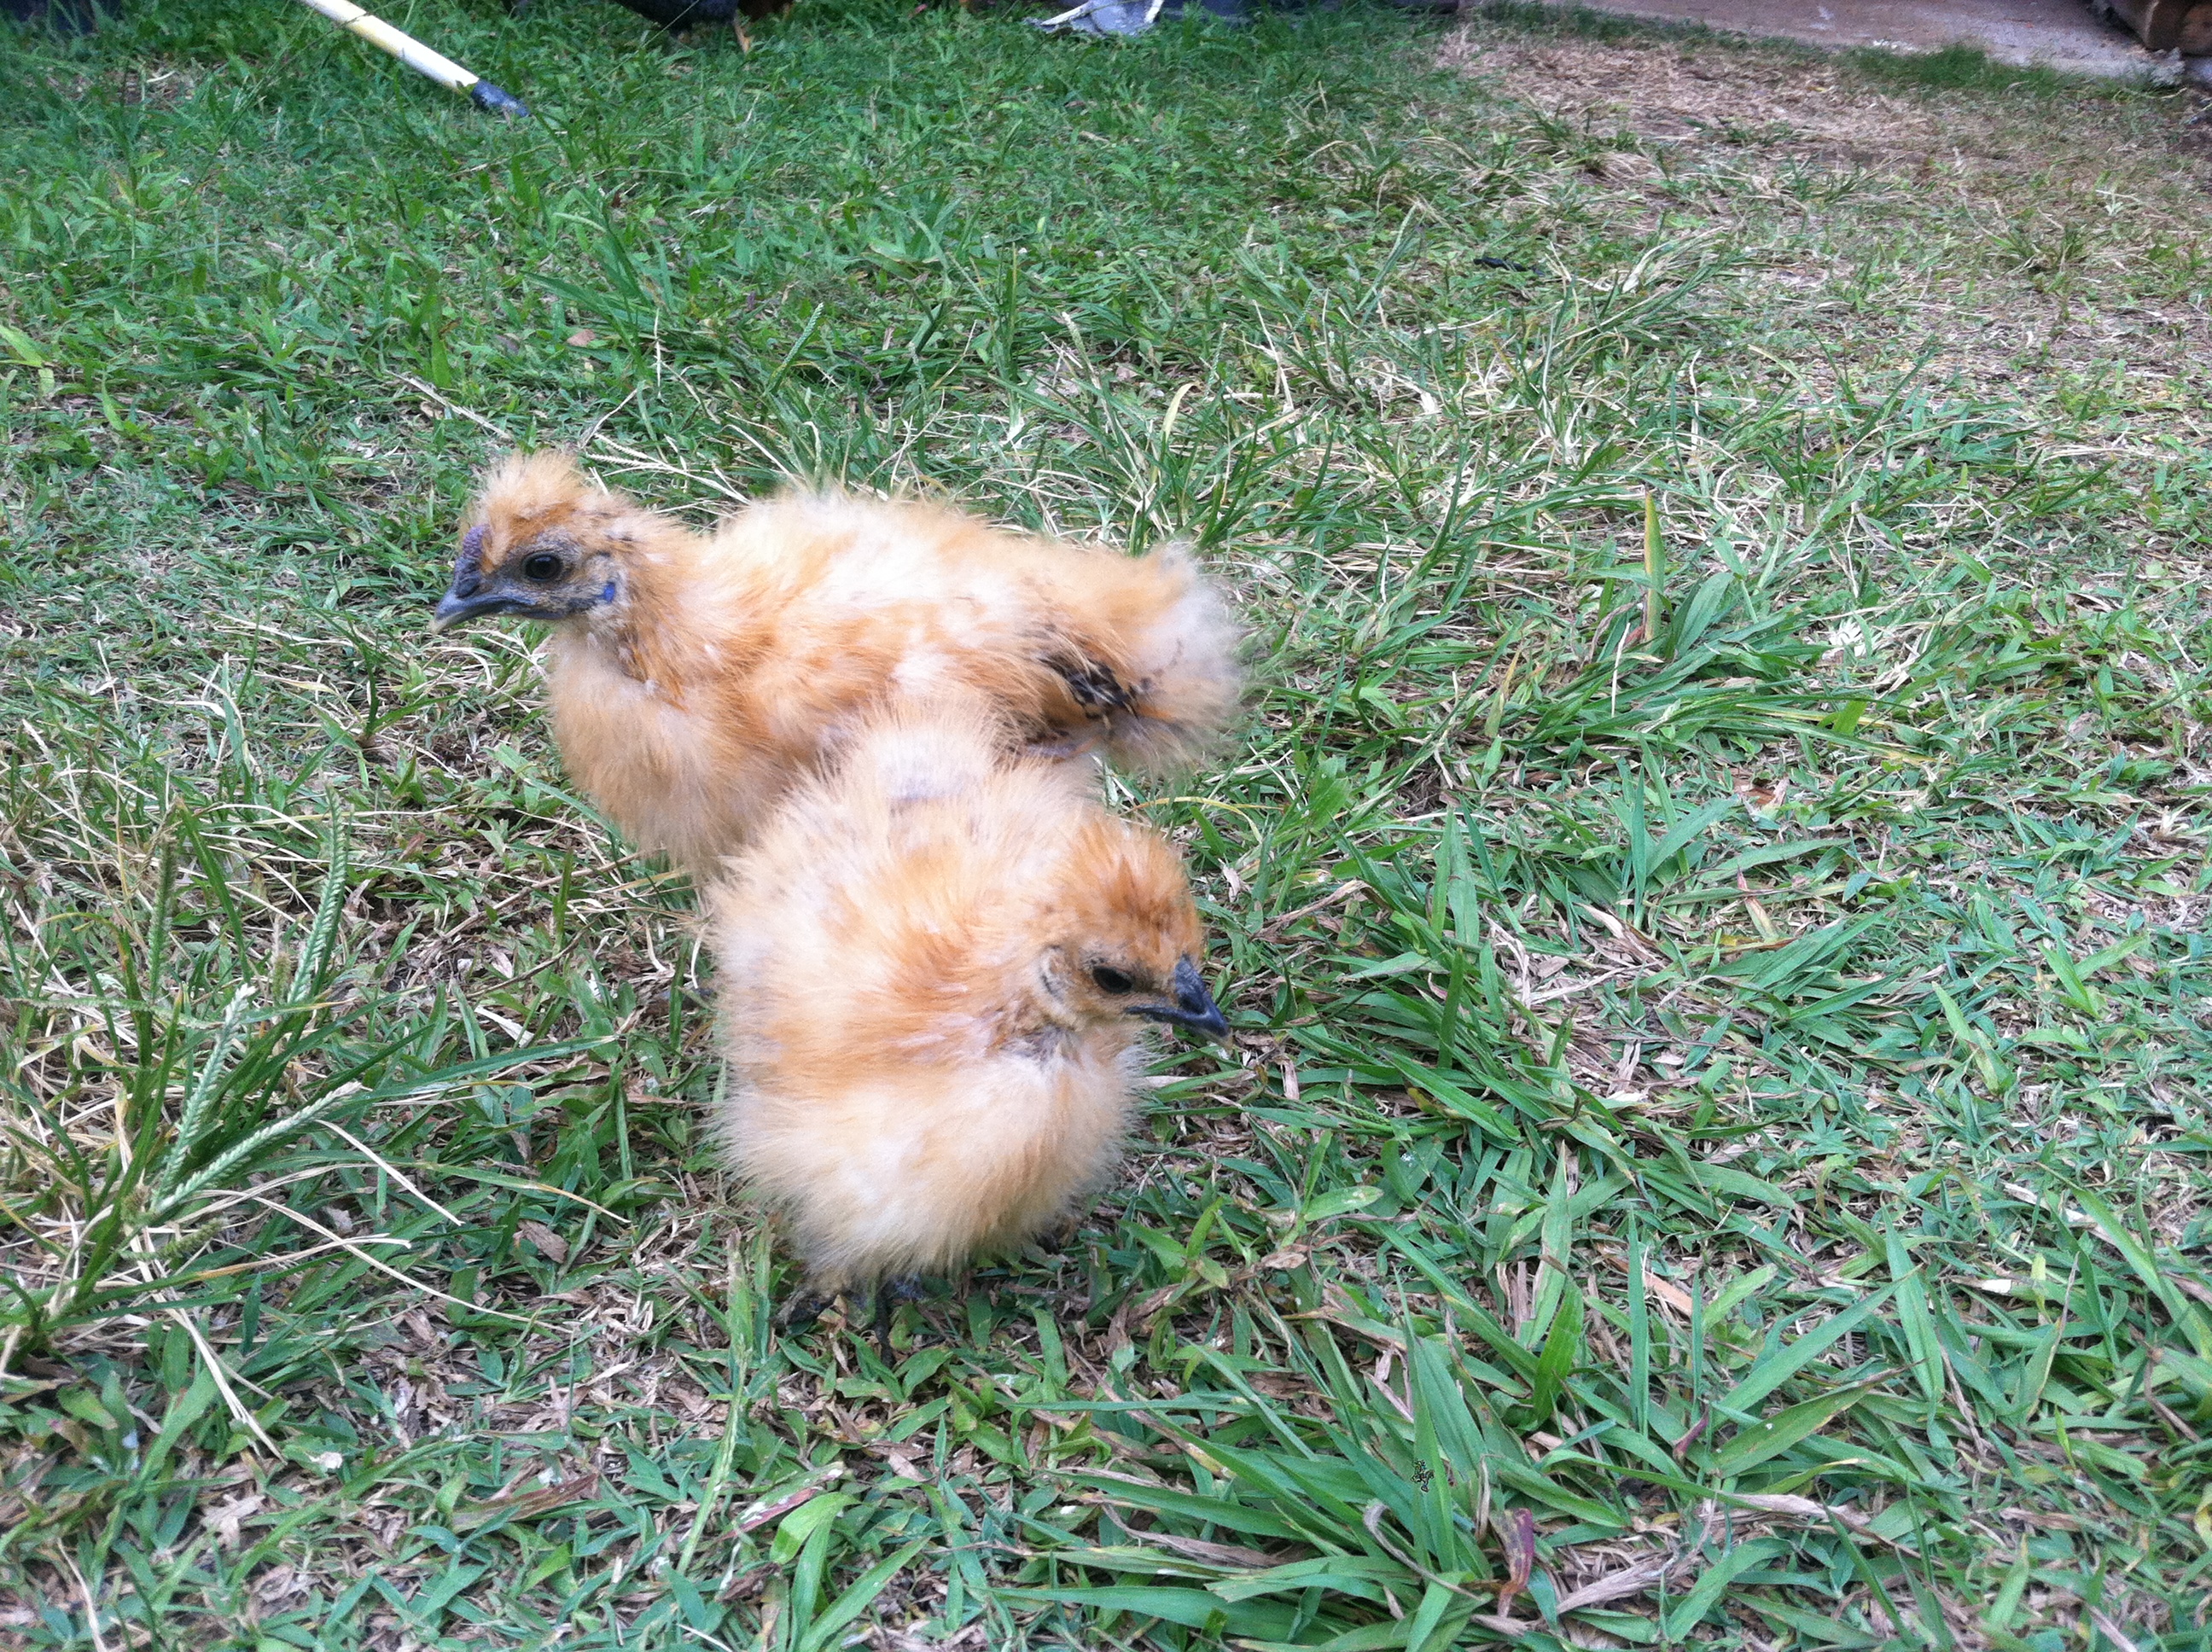 two silky bantams, one rooster, one hen... about 1.5-2 months.
the hen is wanita, and the rooster is jesus.